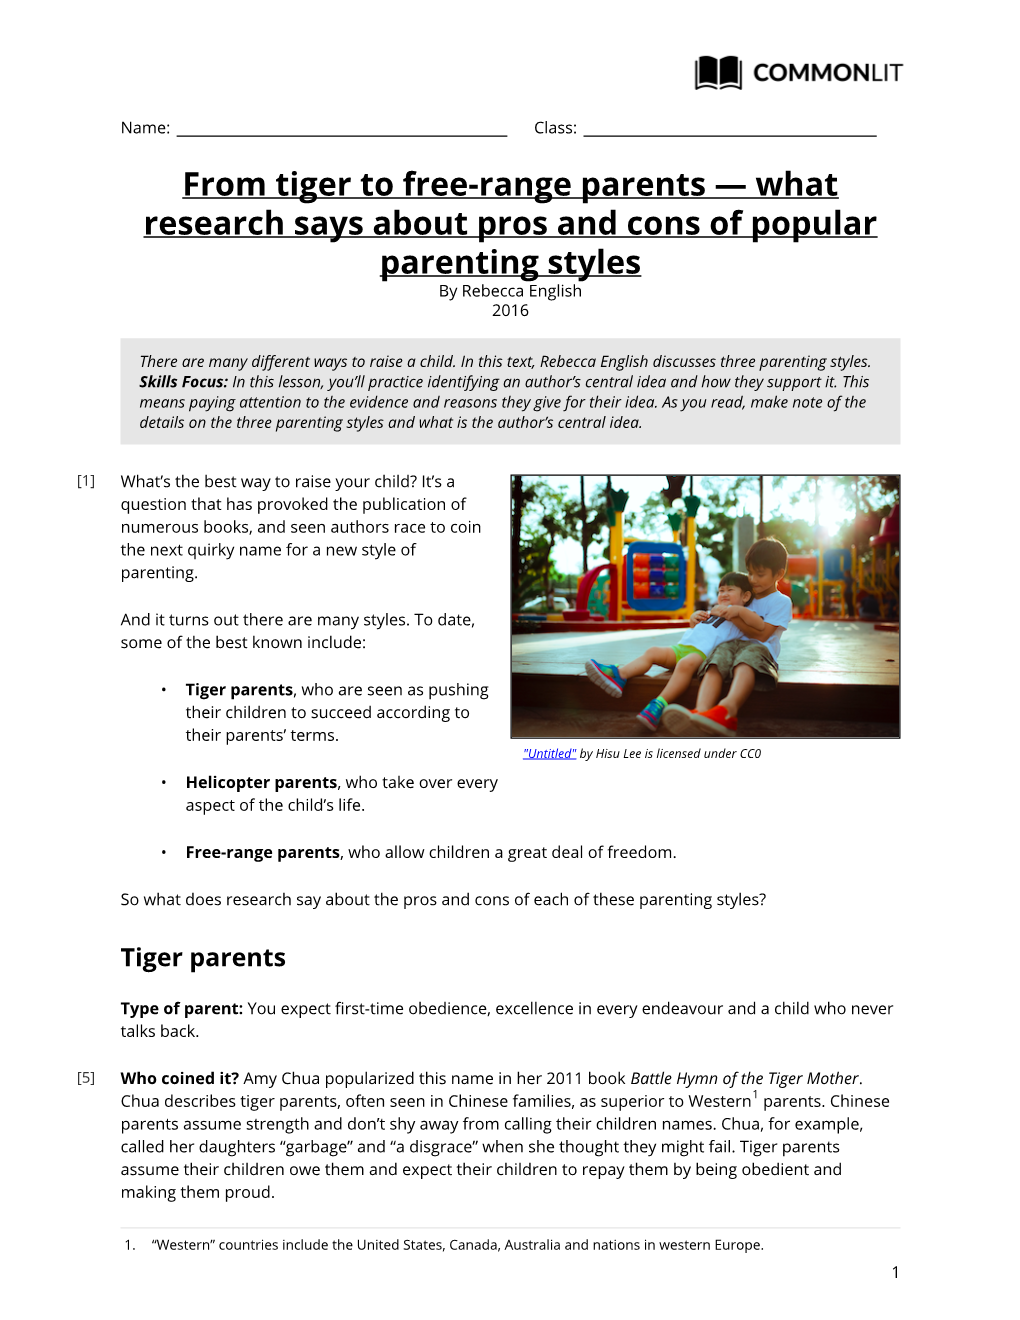 From Tiger to Free-Range Parents — What Research Says About Pros and Cons of Popular Parenting Styles by Rebecca English 2016